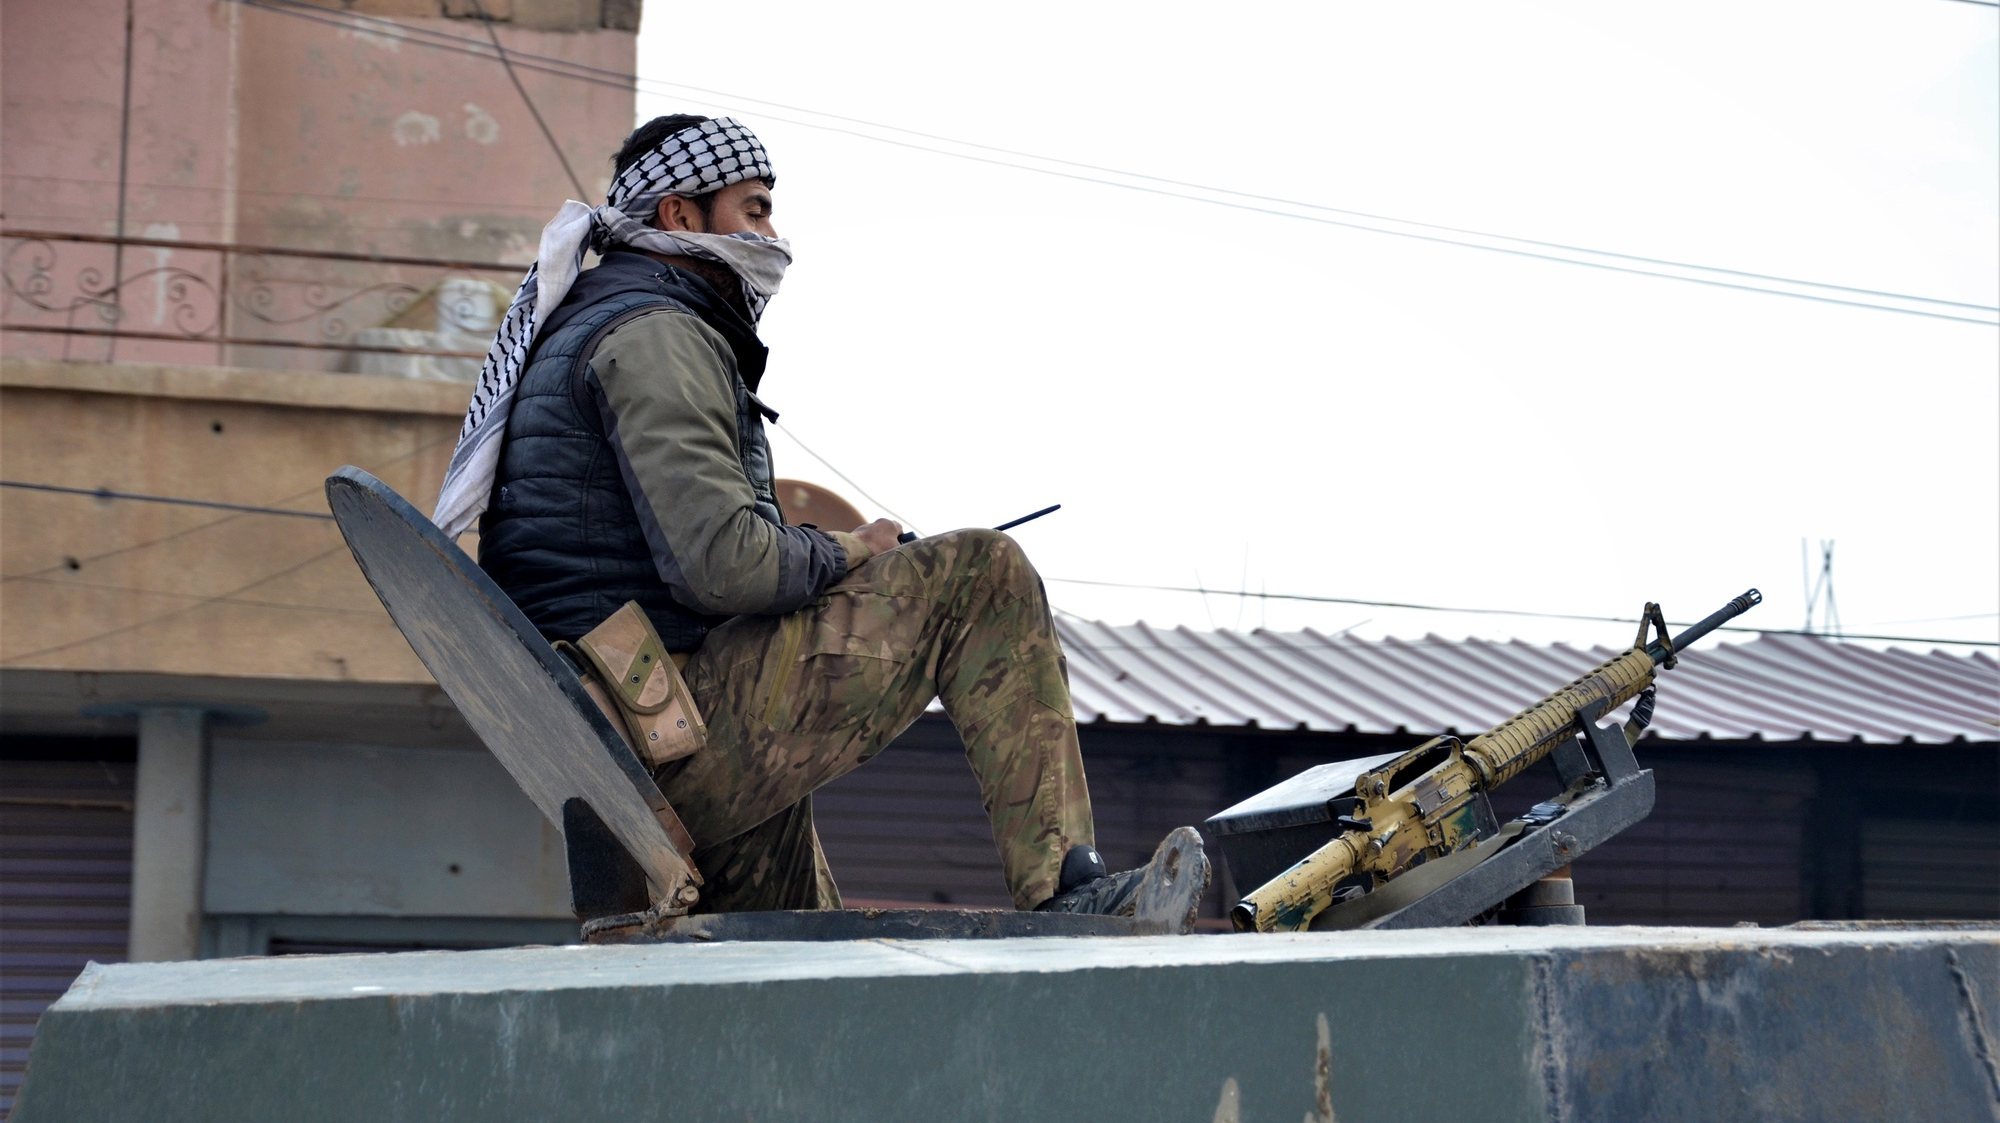 epa09706947 A Fighter of the Syrian democratic forces (SDF) takes up position during a military search operation in Hasaka, northeastern Syria, 24 January 2022. Islamic State group fighters attacked Ghweran and al-Shaddadi prisons in al-Hasaka on 20 January 2022, to break thousands of its affiliates out of the prison.  EPA/AHMED MARDNLI